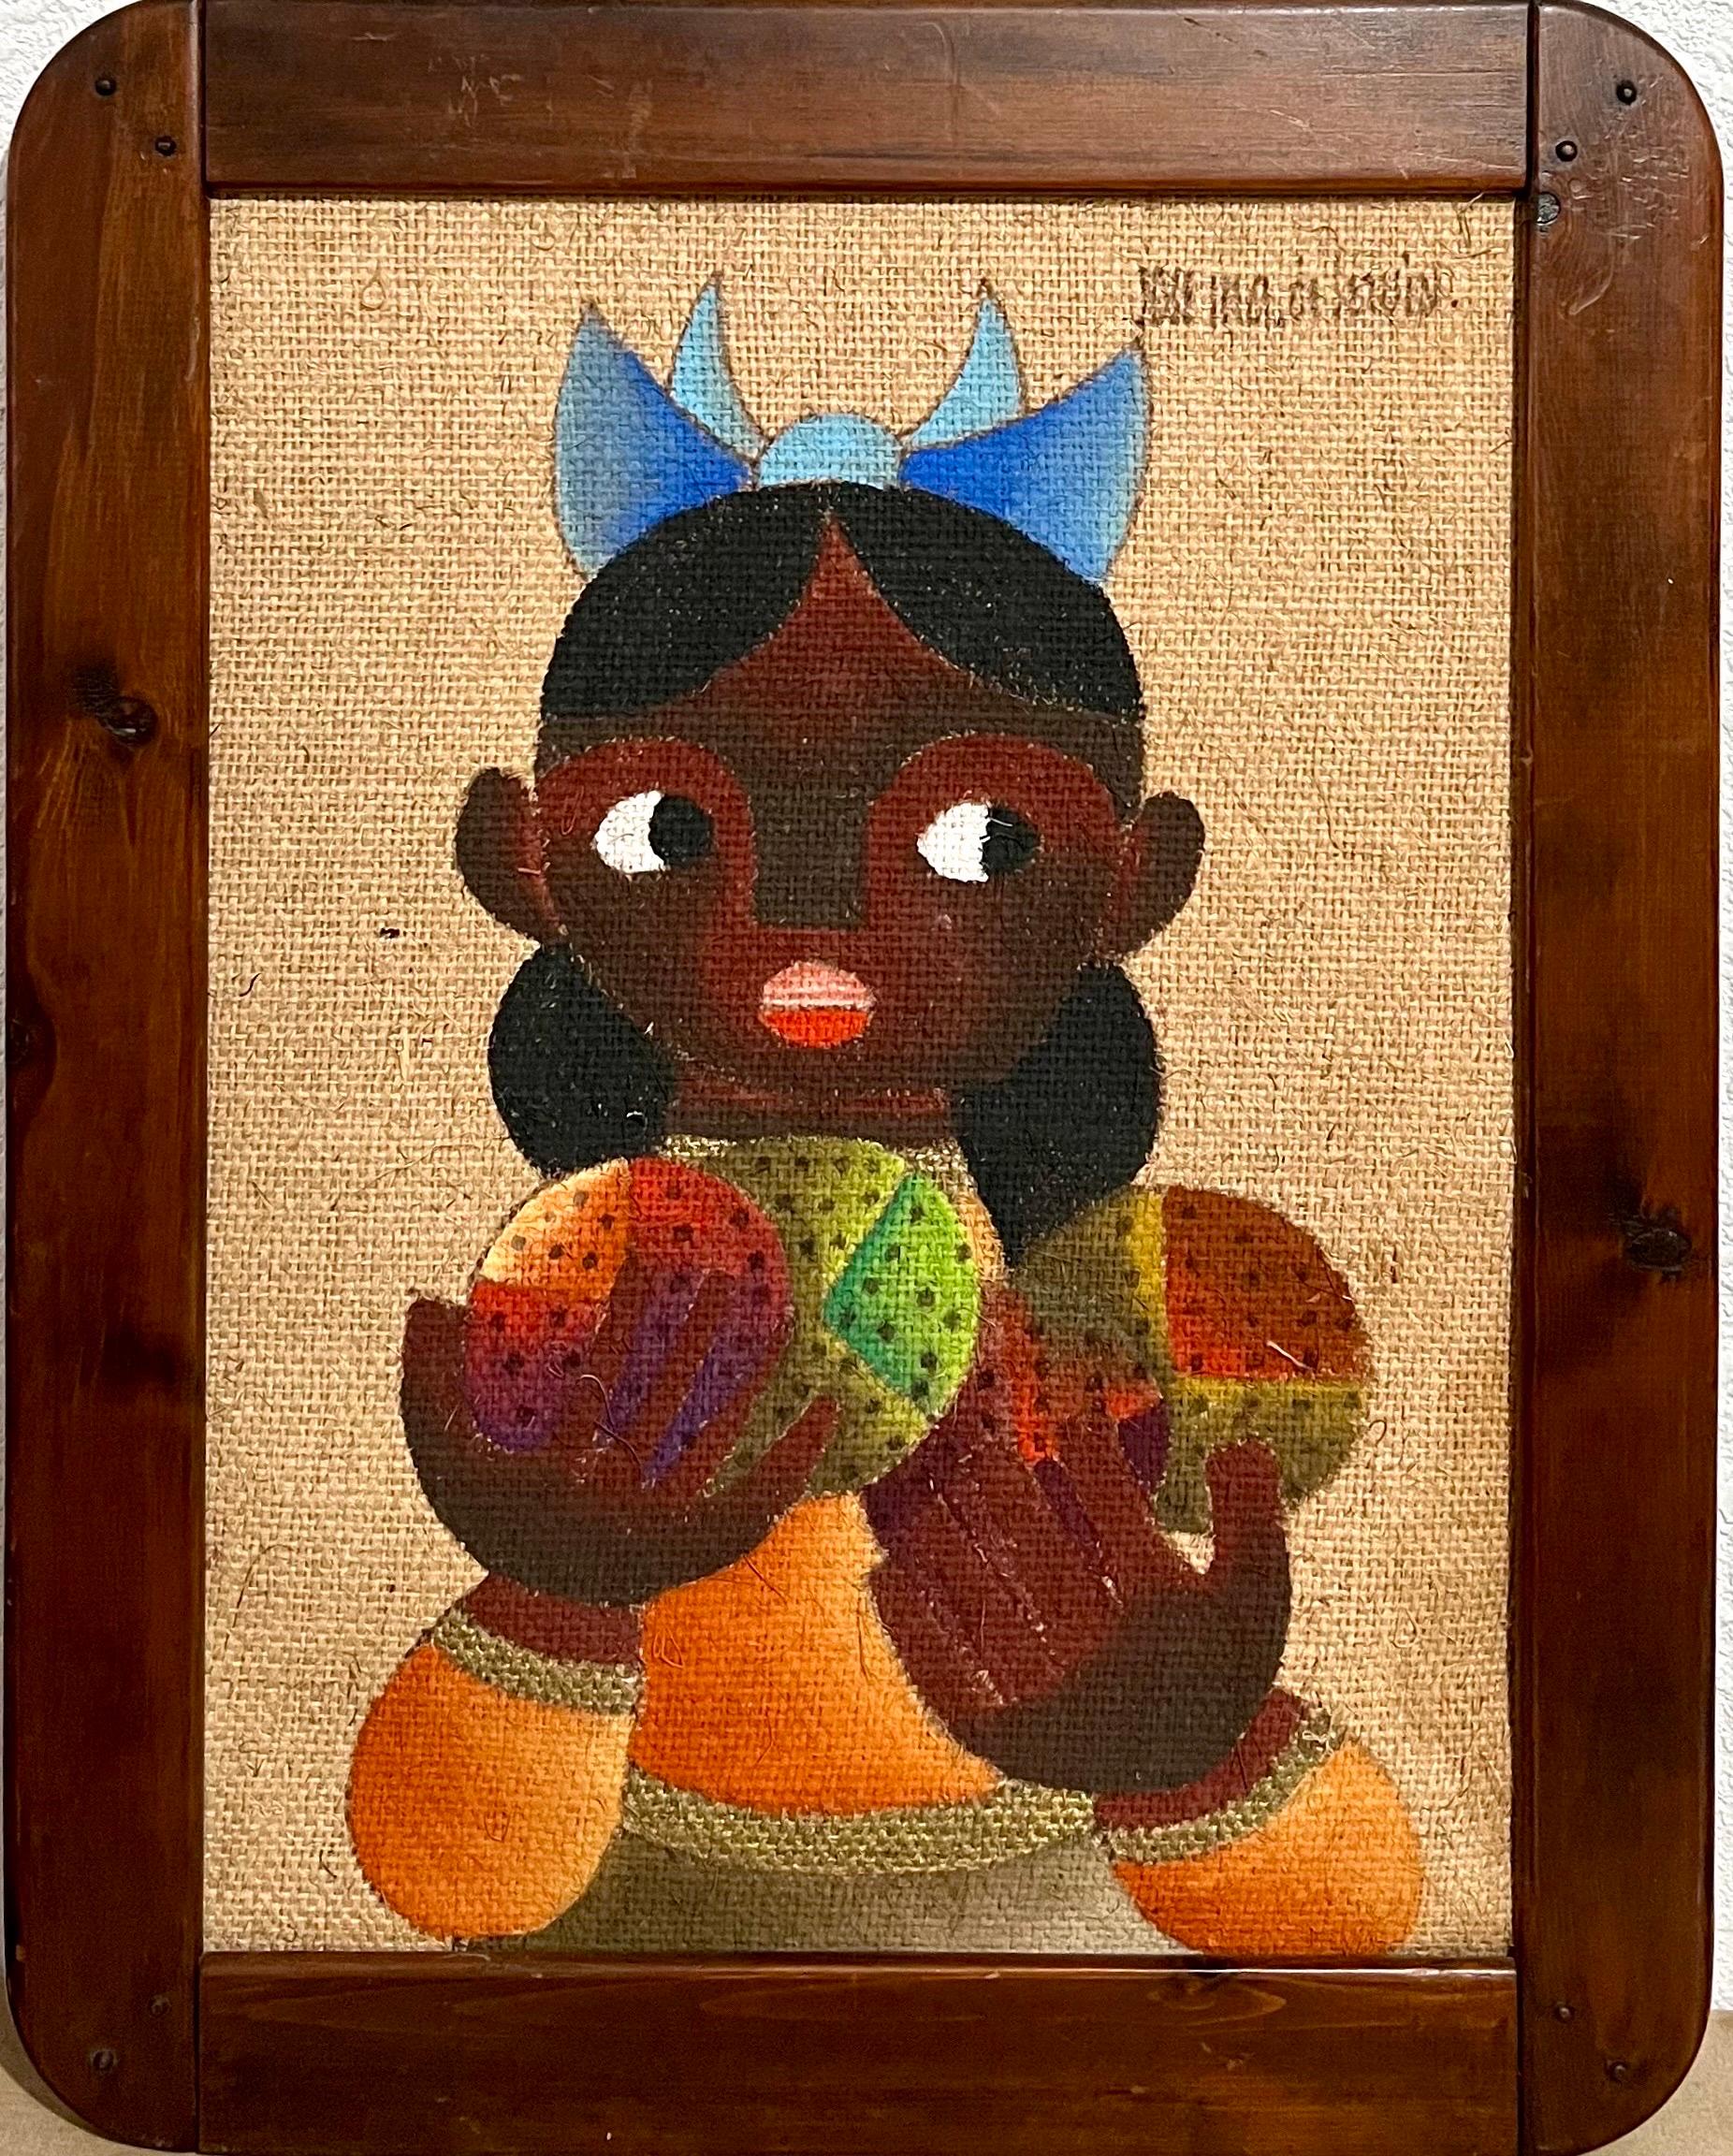 Jose Maria de Servin Figurative Painting - Folk Art Mexican Girl Oil Painting on Burlap Charming Naive African American Art